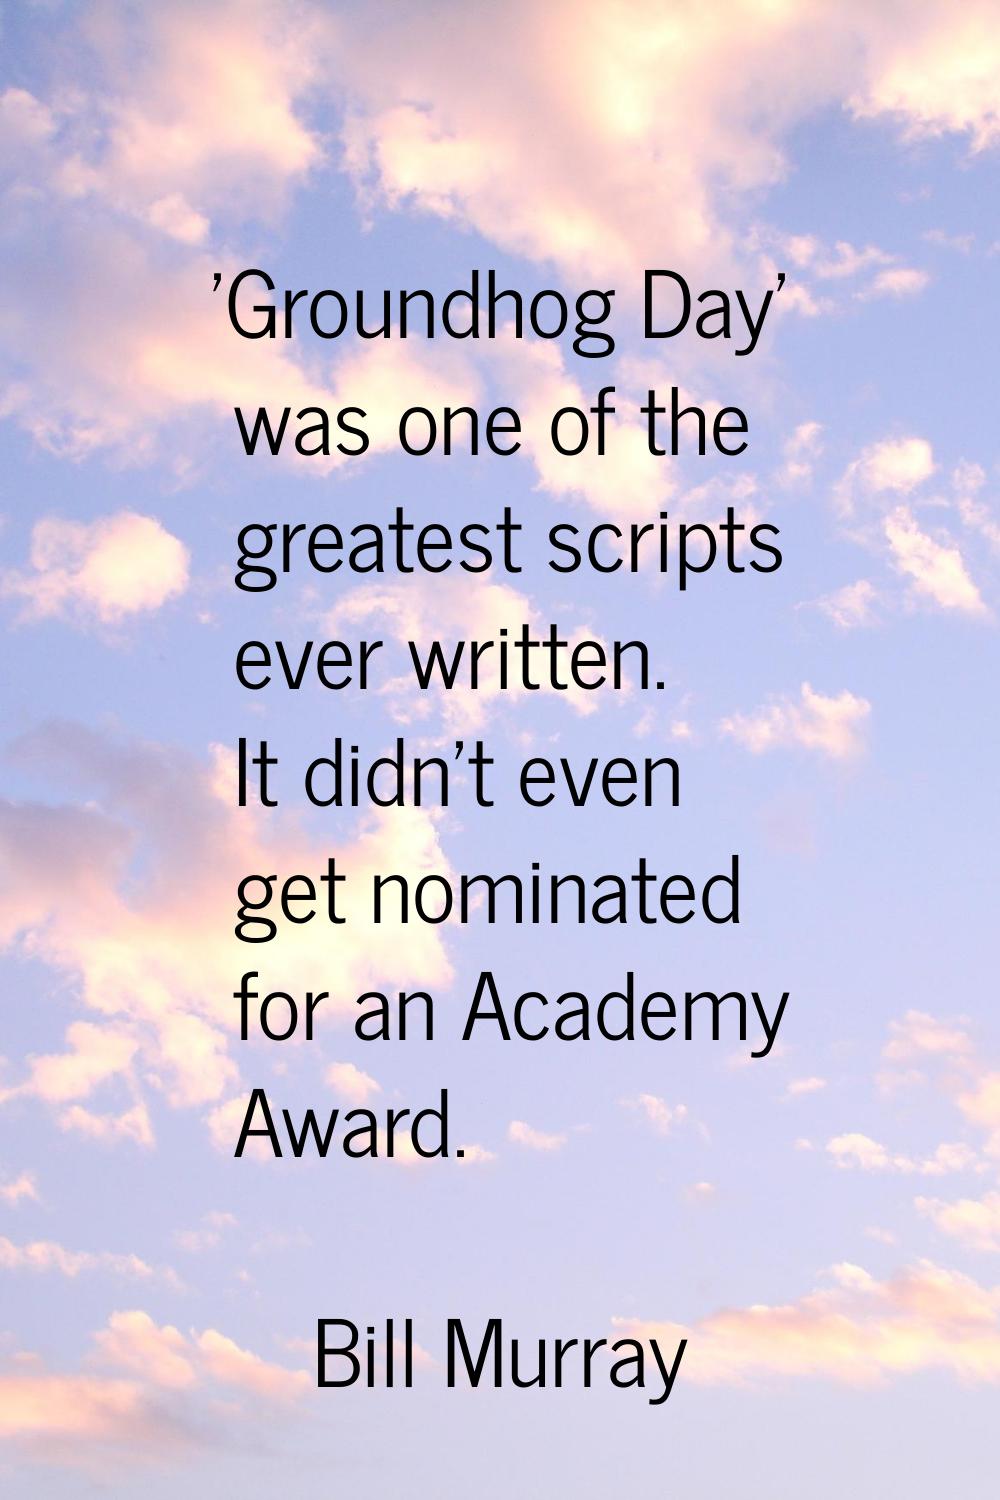 'Groundhog Day' was one of the greatest scripts ever written. It didn't even get nominated for an A